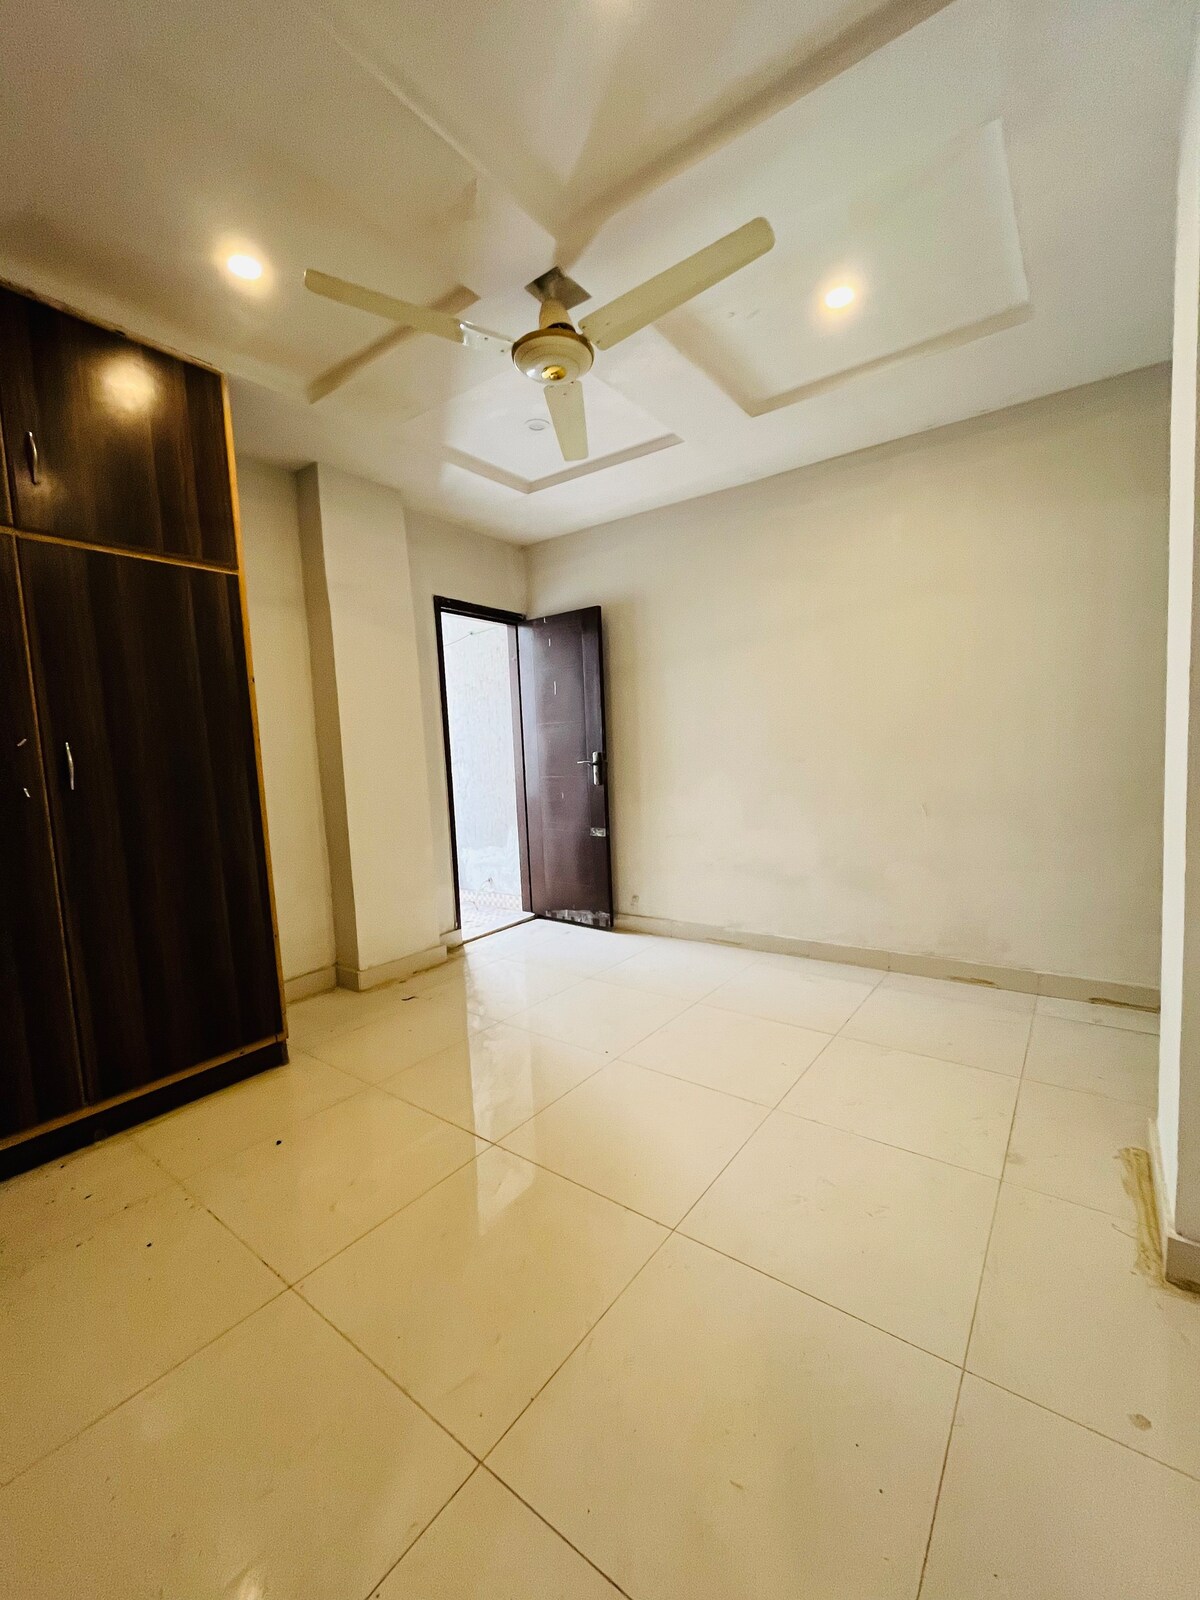 2 Bedroom Flat For Monthly Basis